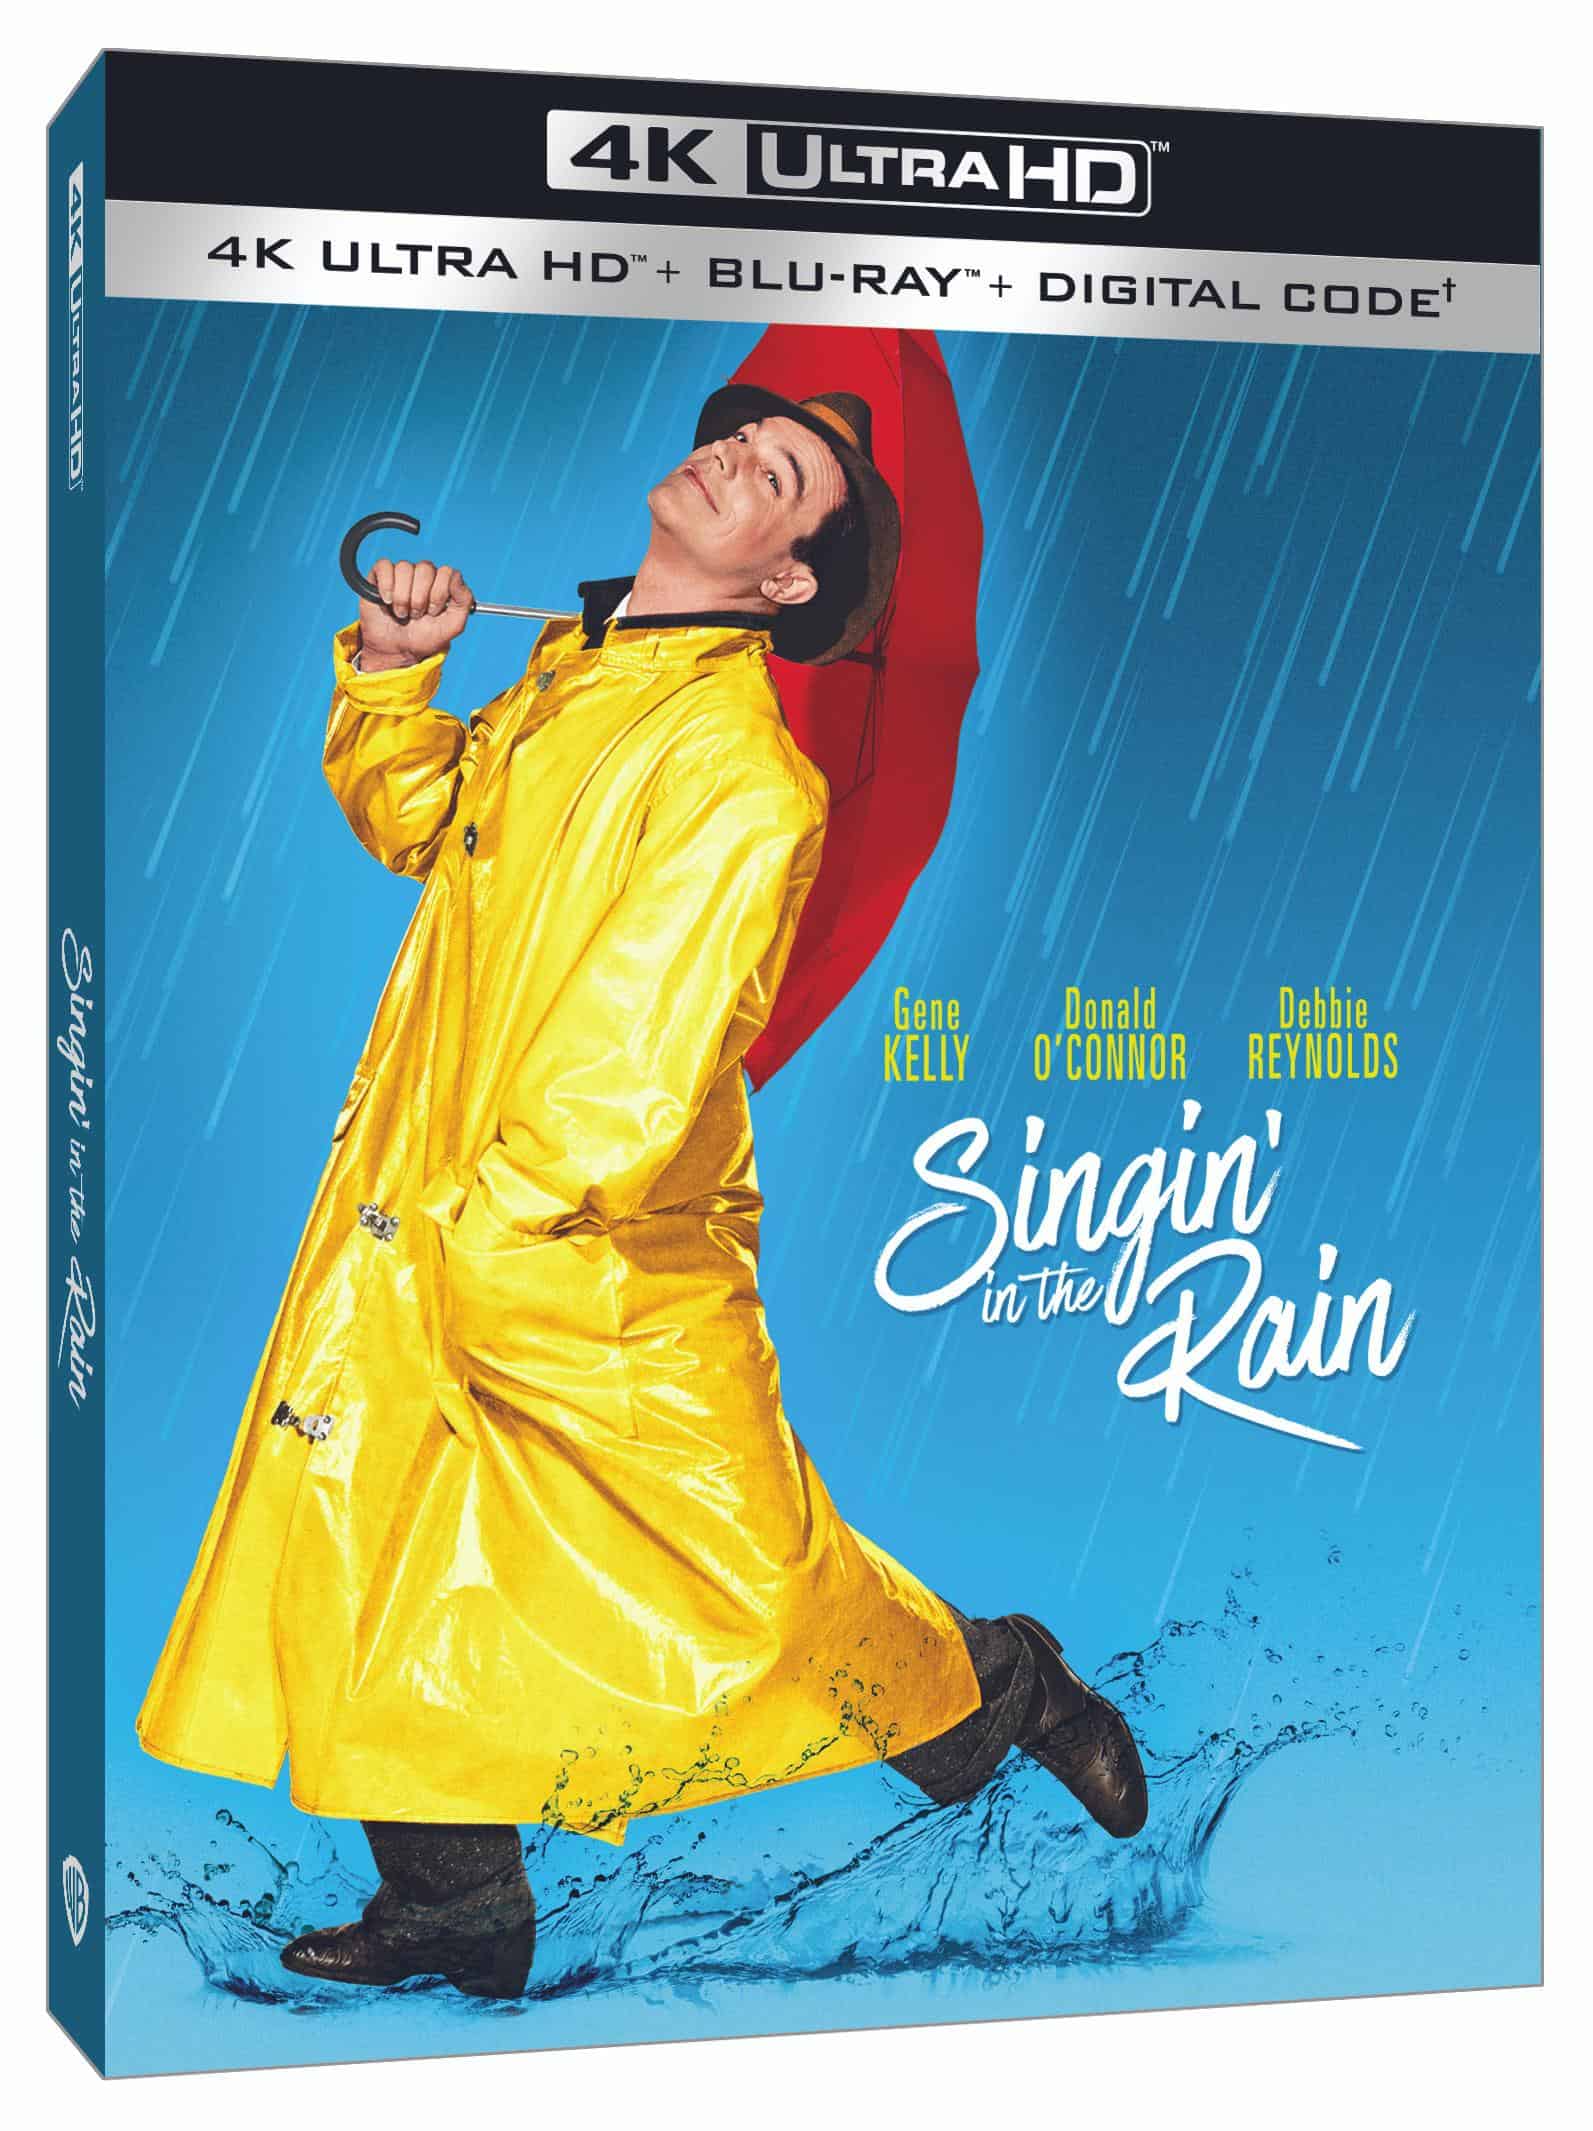 Singin in the Rain sings its way onto 4K UHD on April 26th 18